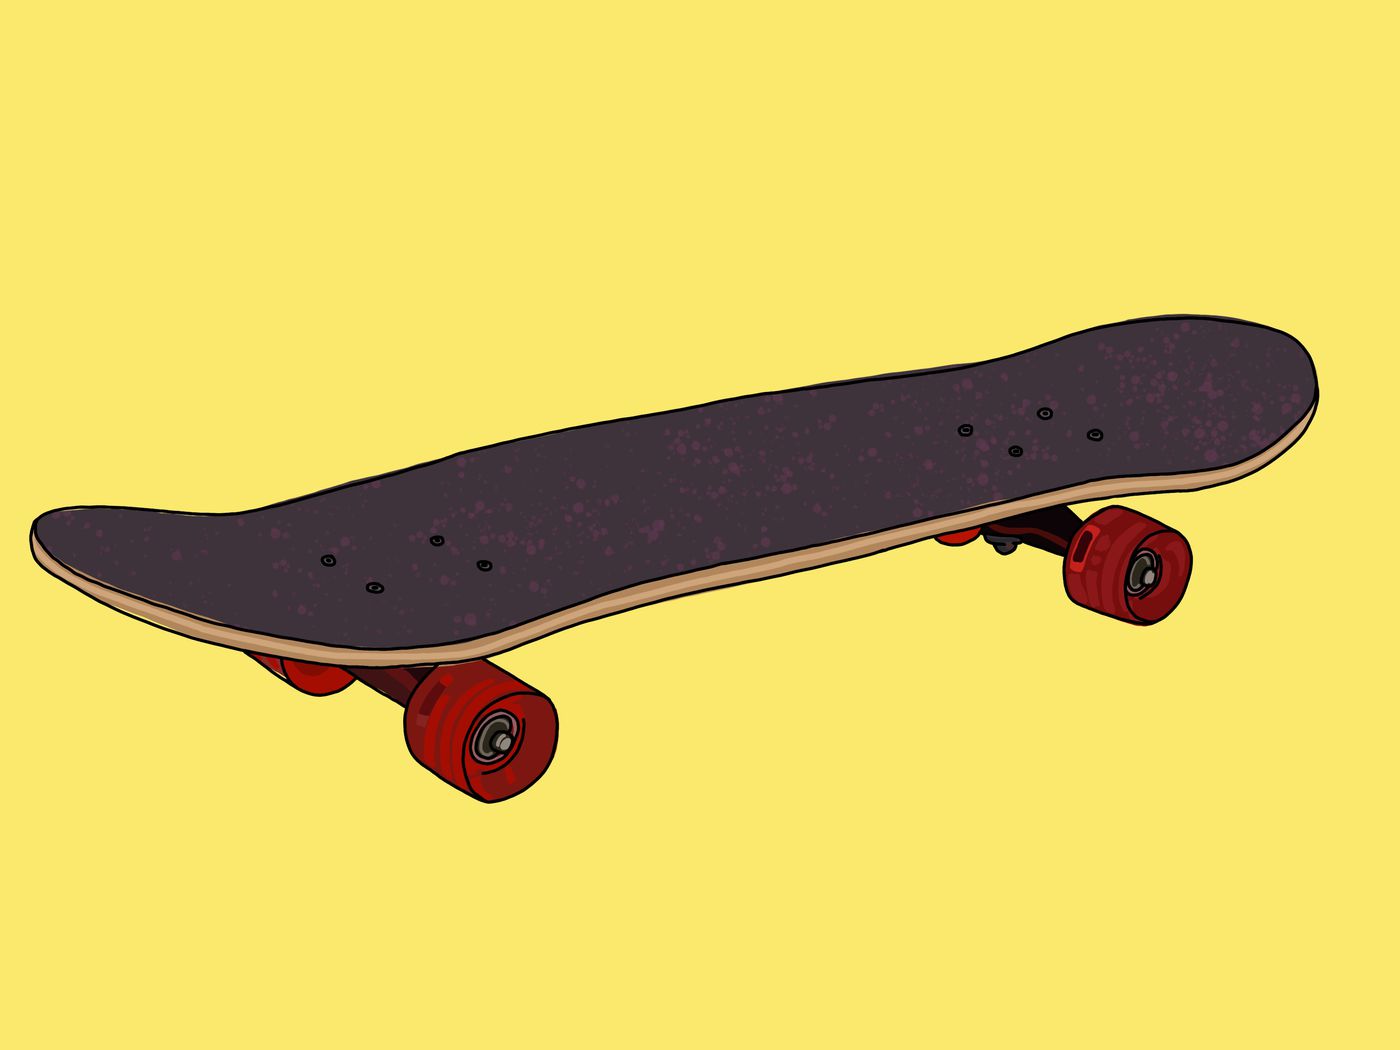 Learning to skateboard as adult was the best $141 ever spent” - Vox